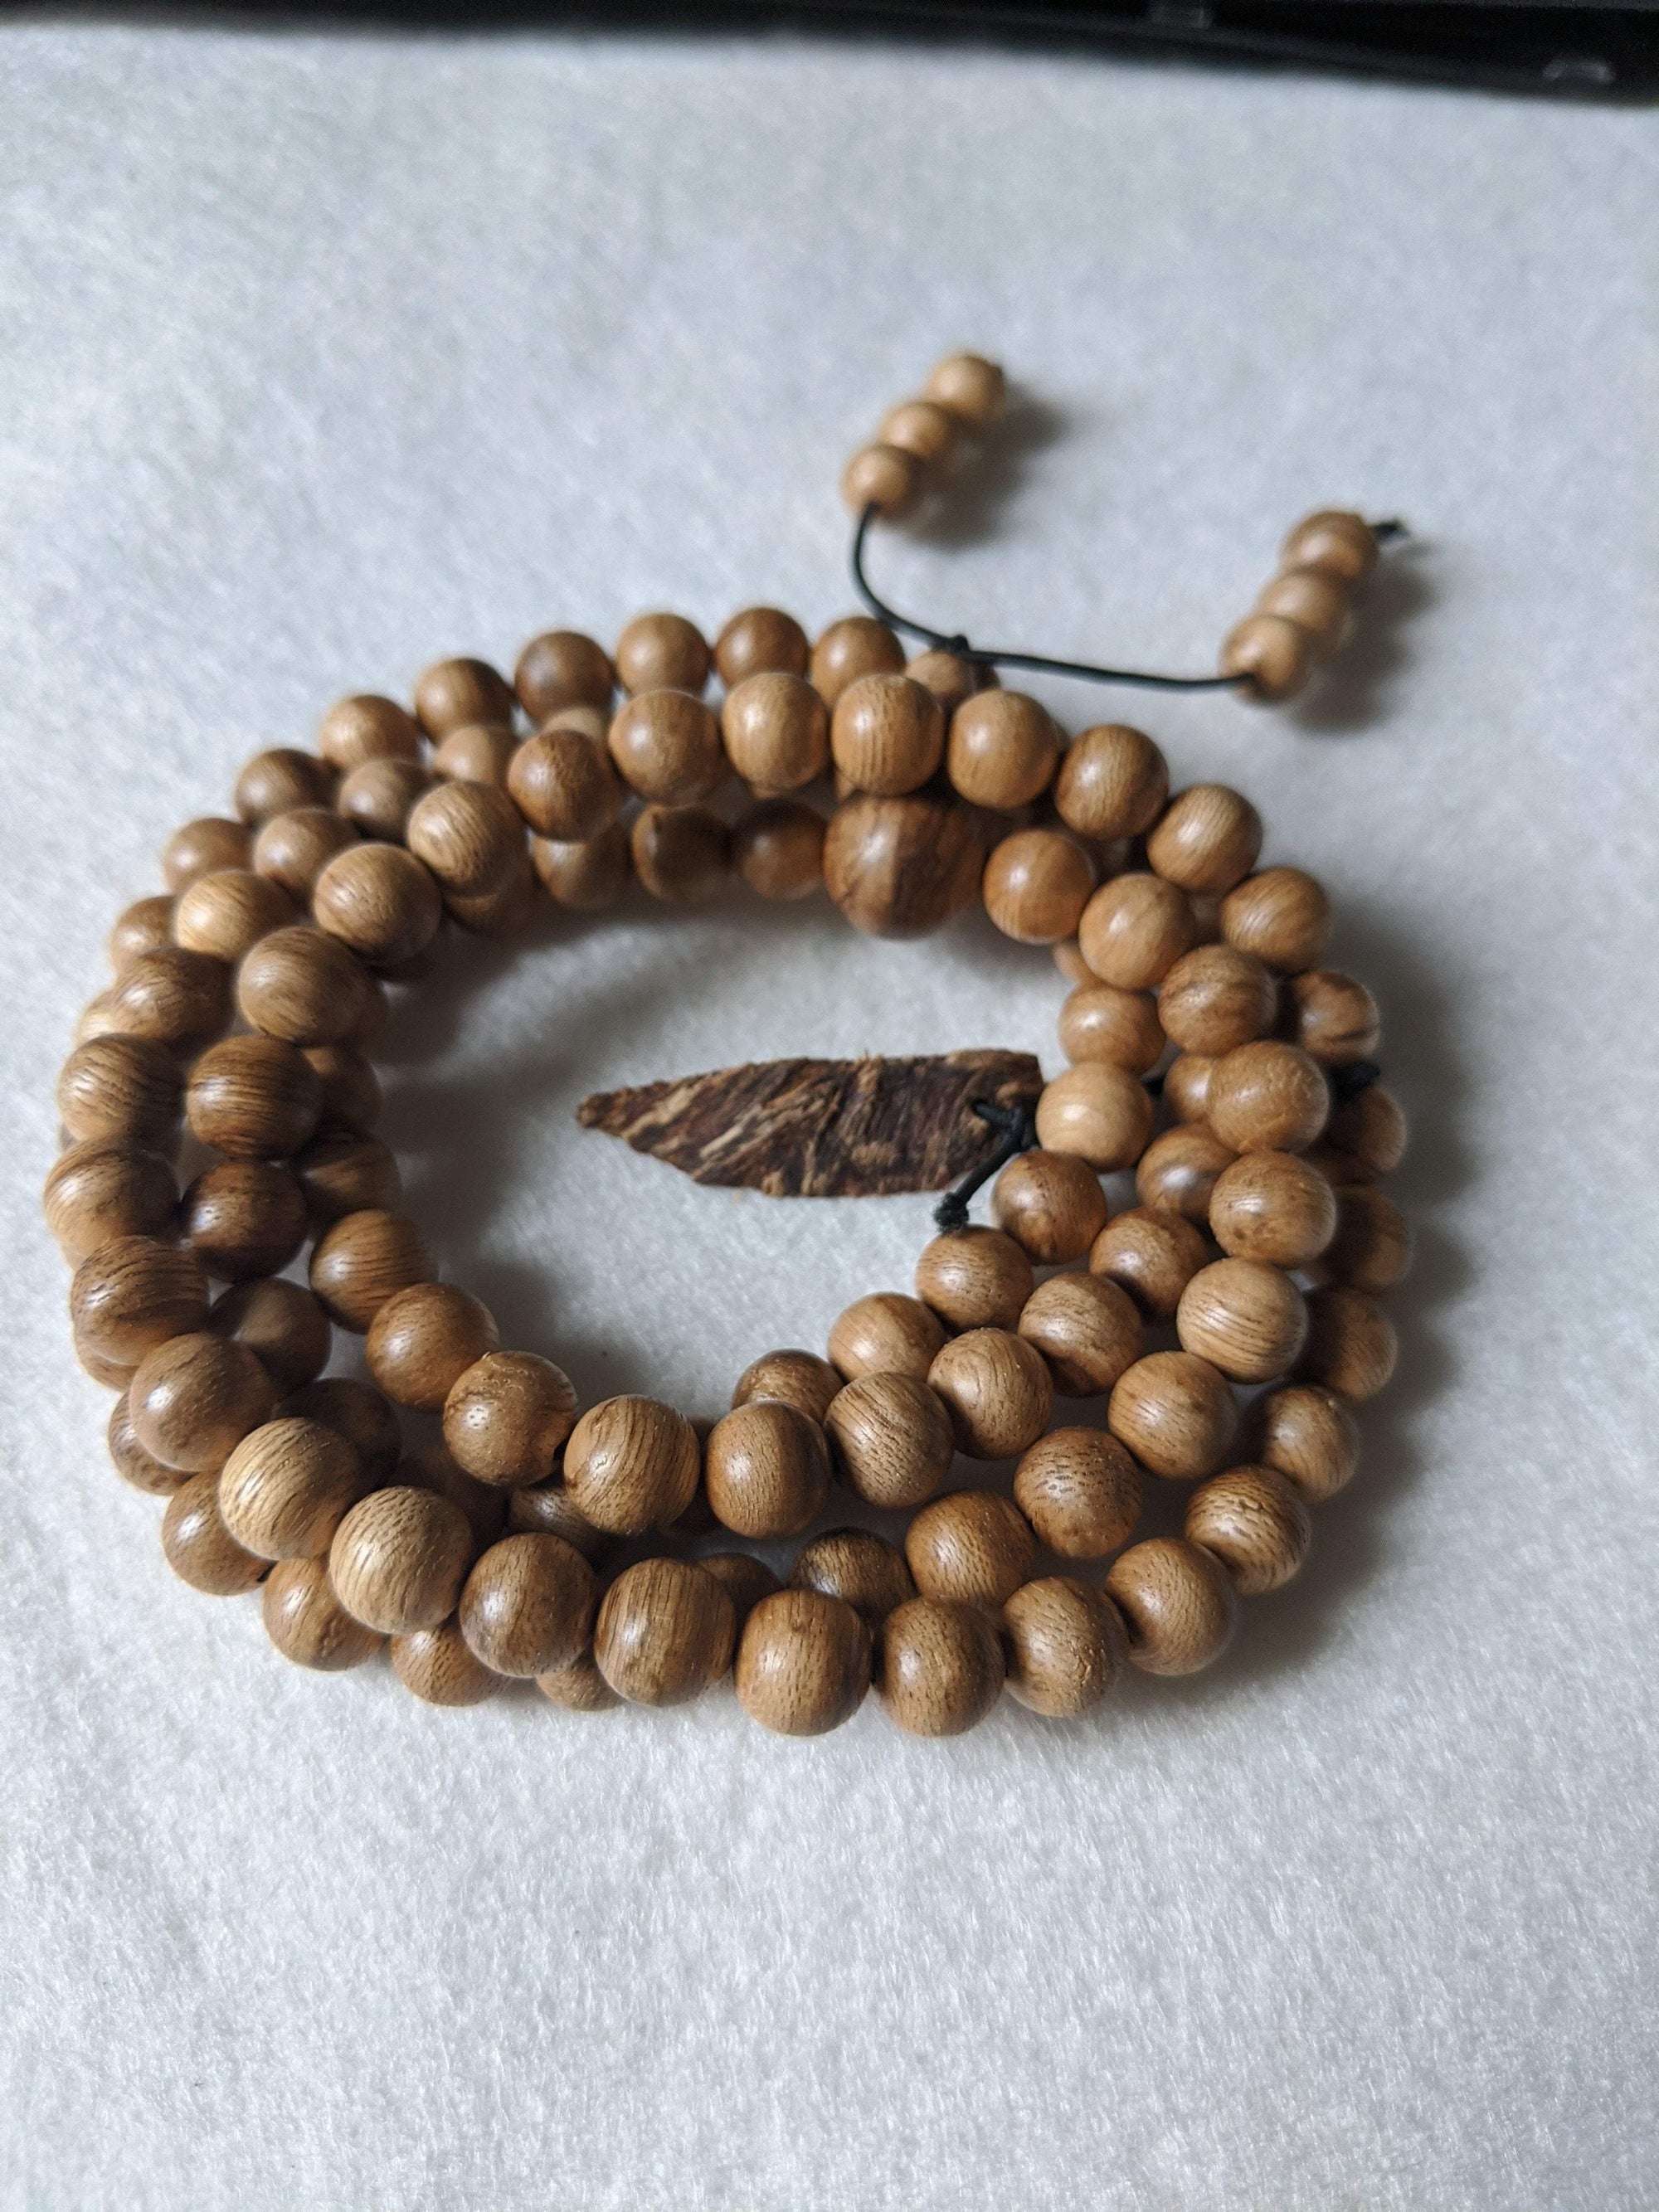 SOLD- 12.5 g, 8mm, Wild Borneo Agarwood 108 mala with a large piece of remaining material -